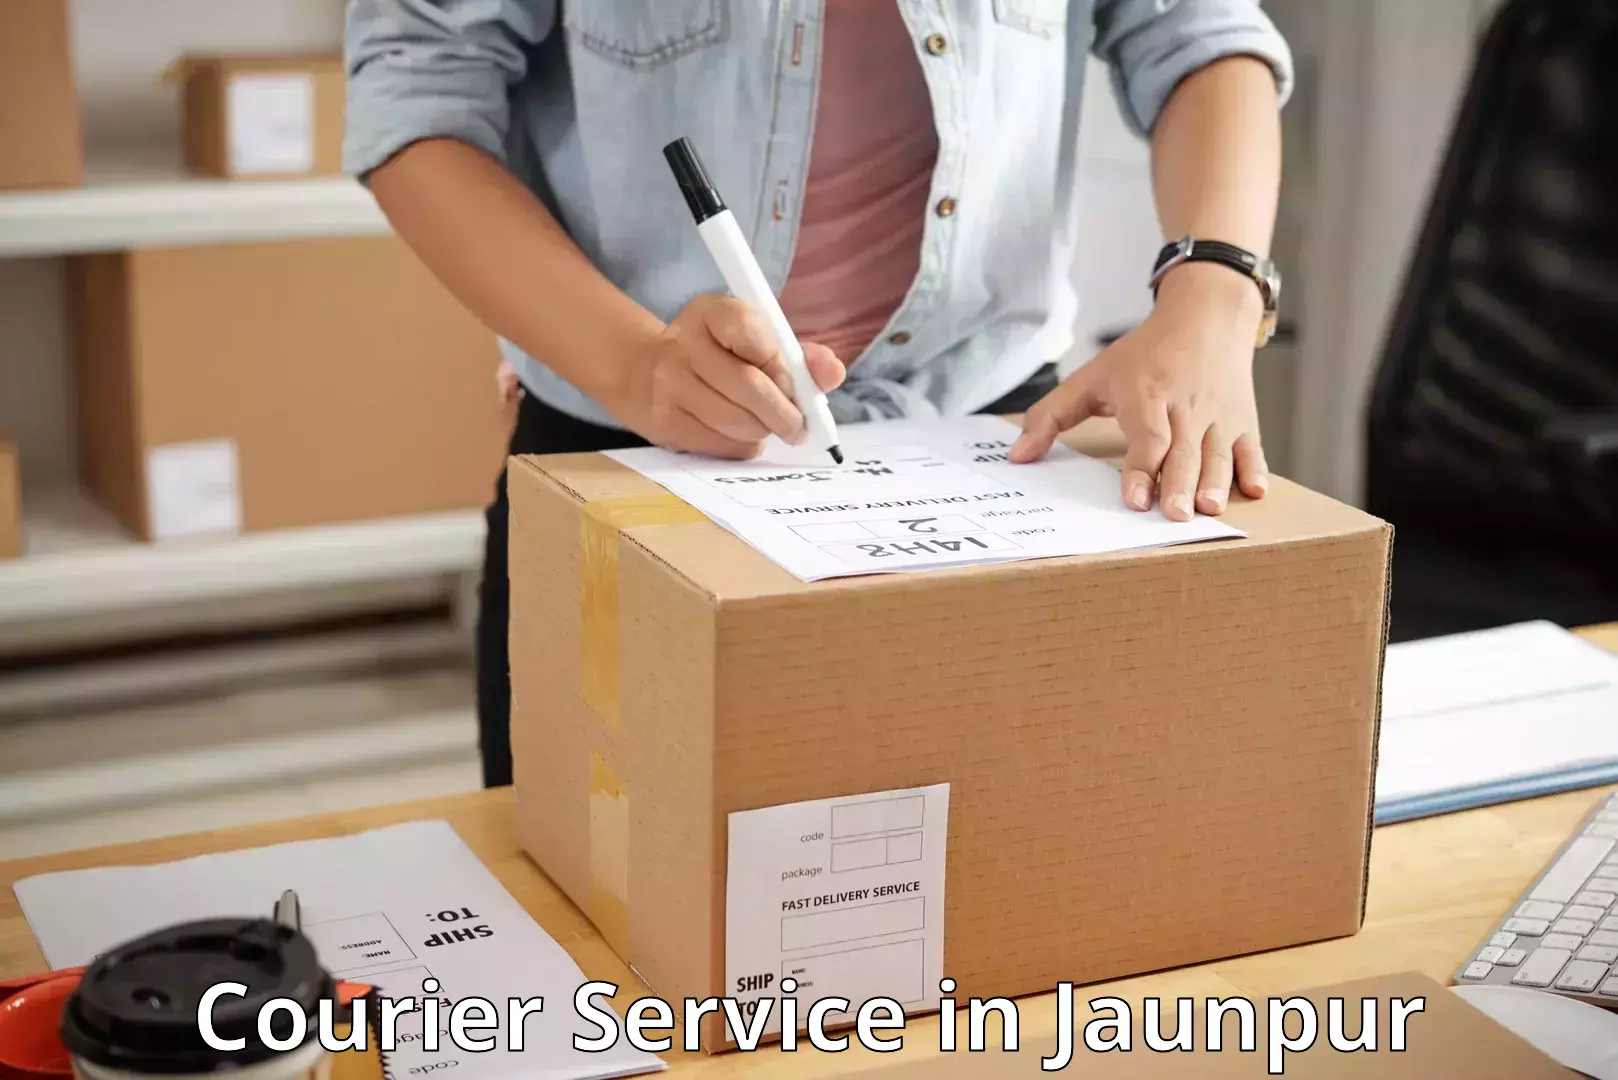 State-of-the-art courier technology in Jaunpur